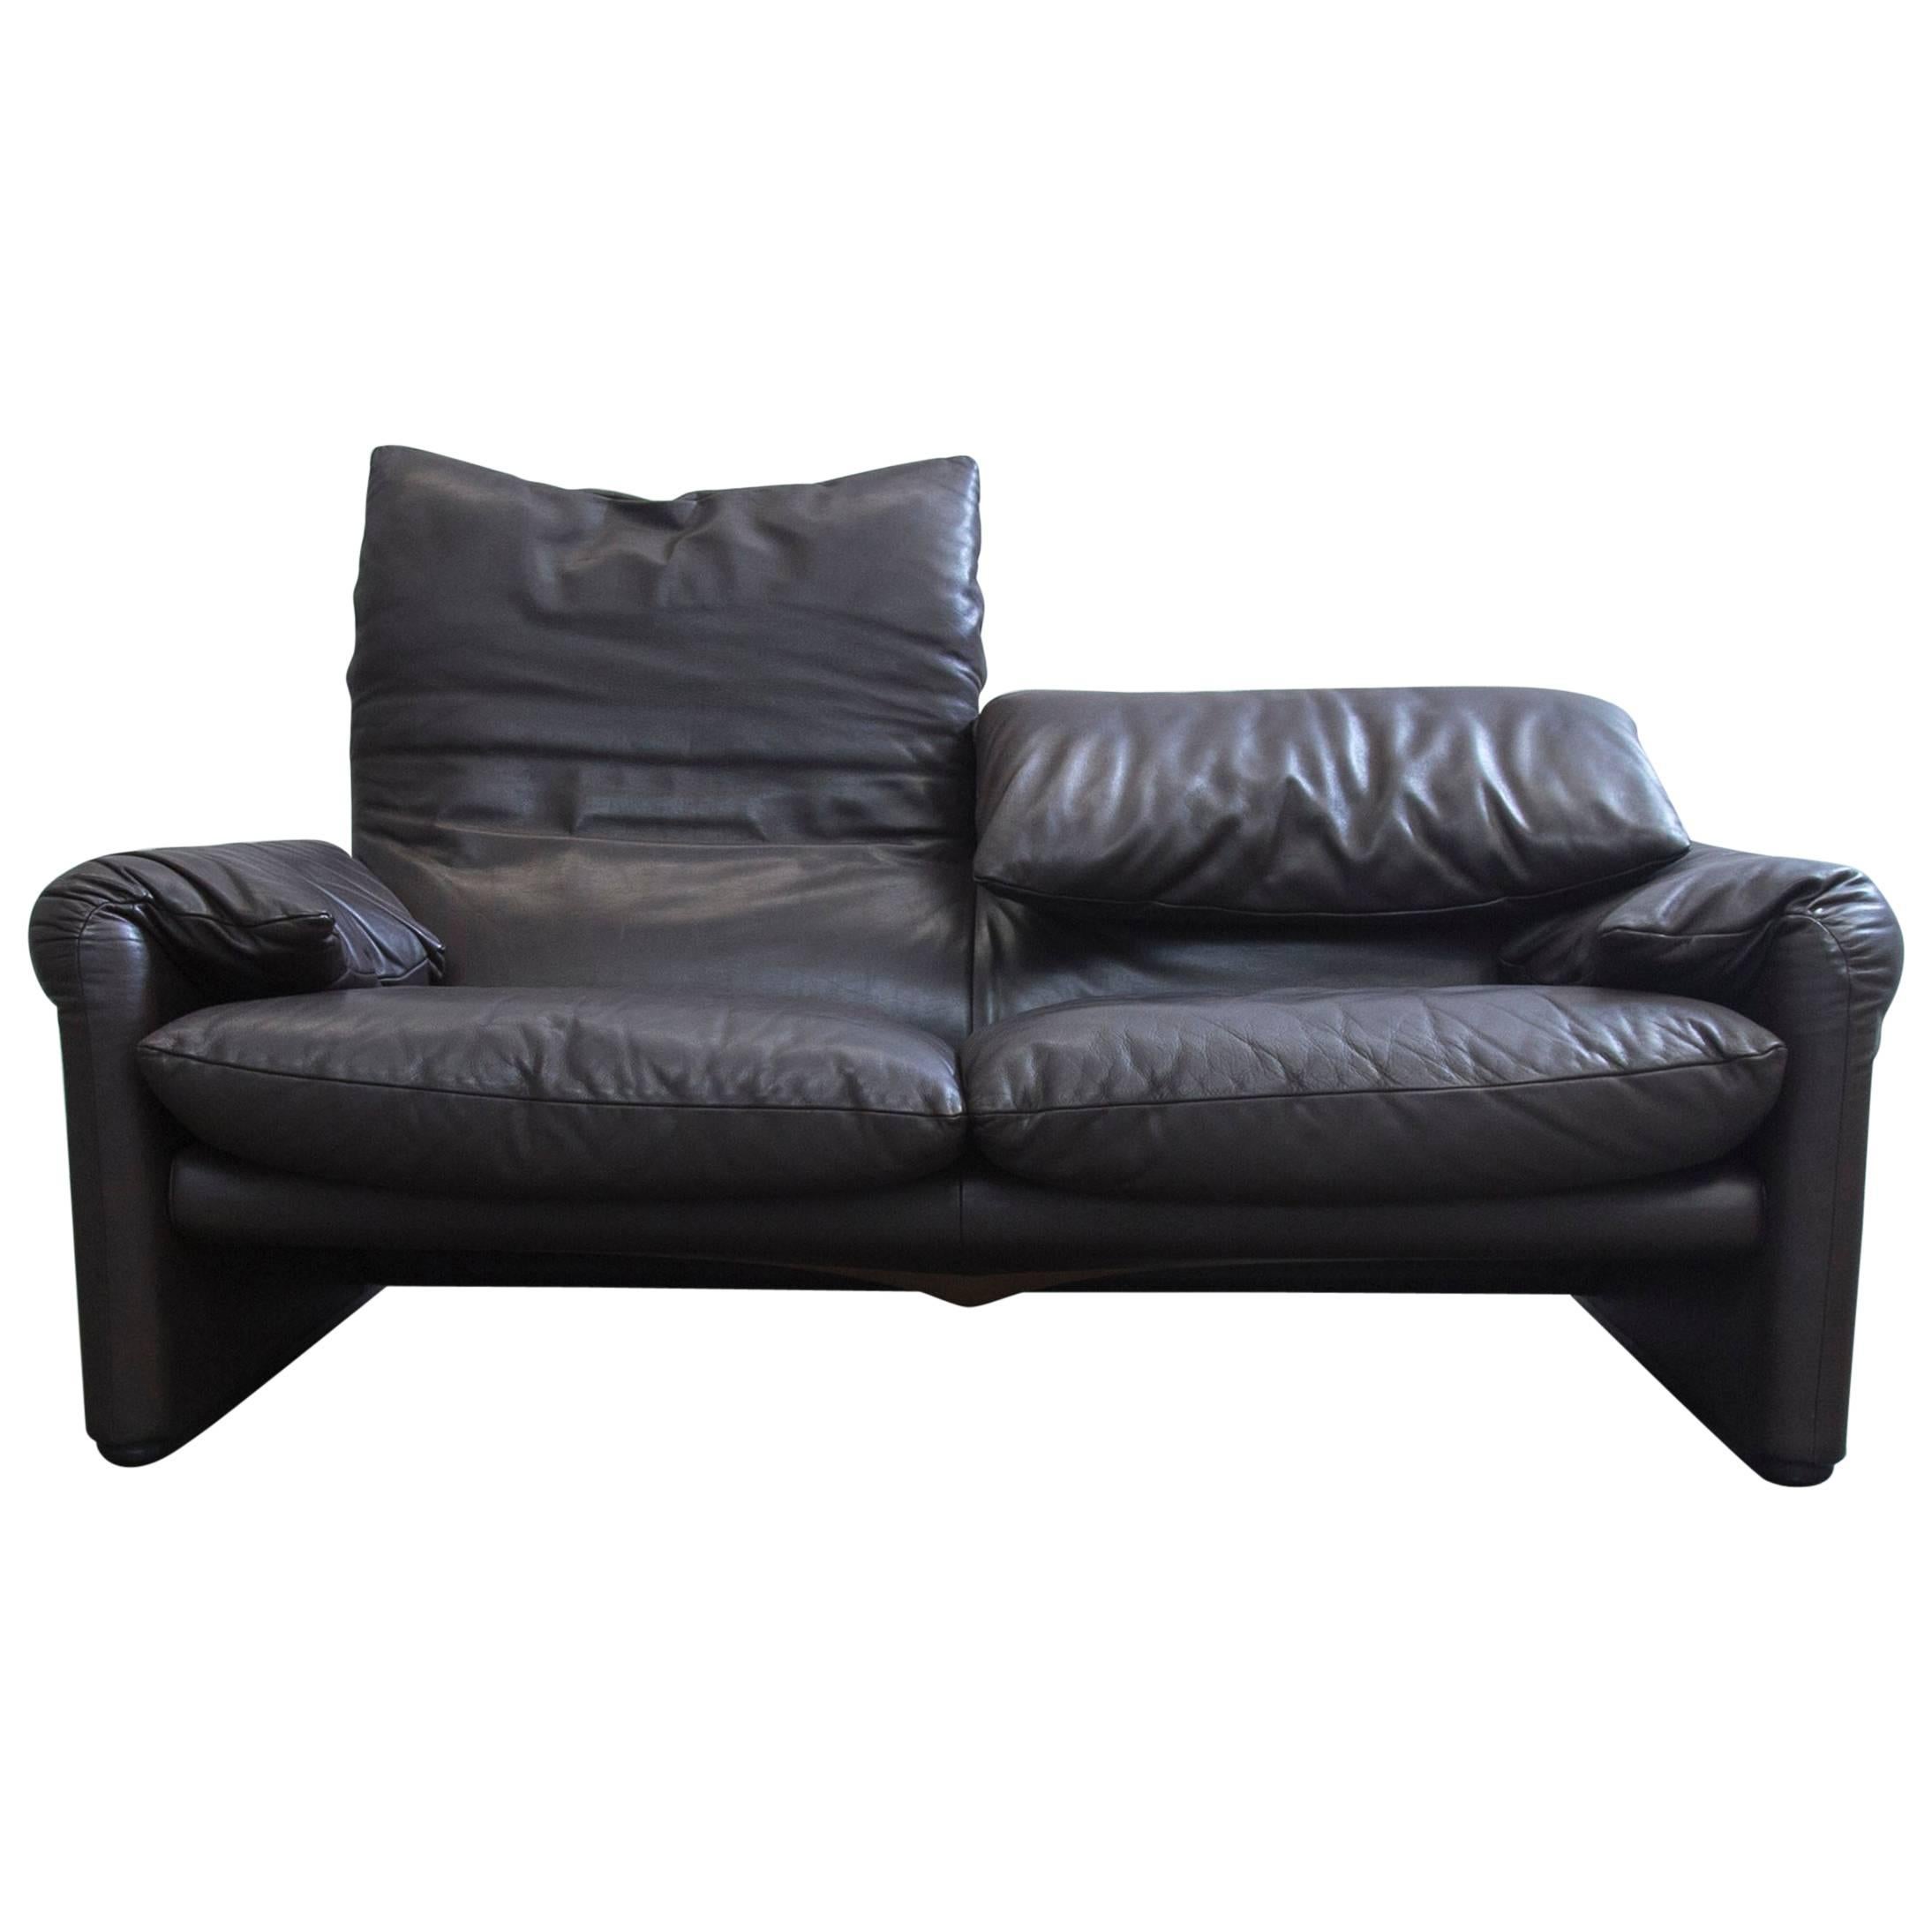 Cassina Maralunga Designer Sofa Mocca Brown Leather Two-Seat Function Modern